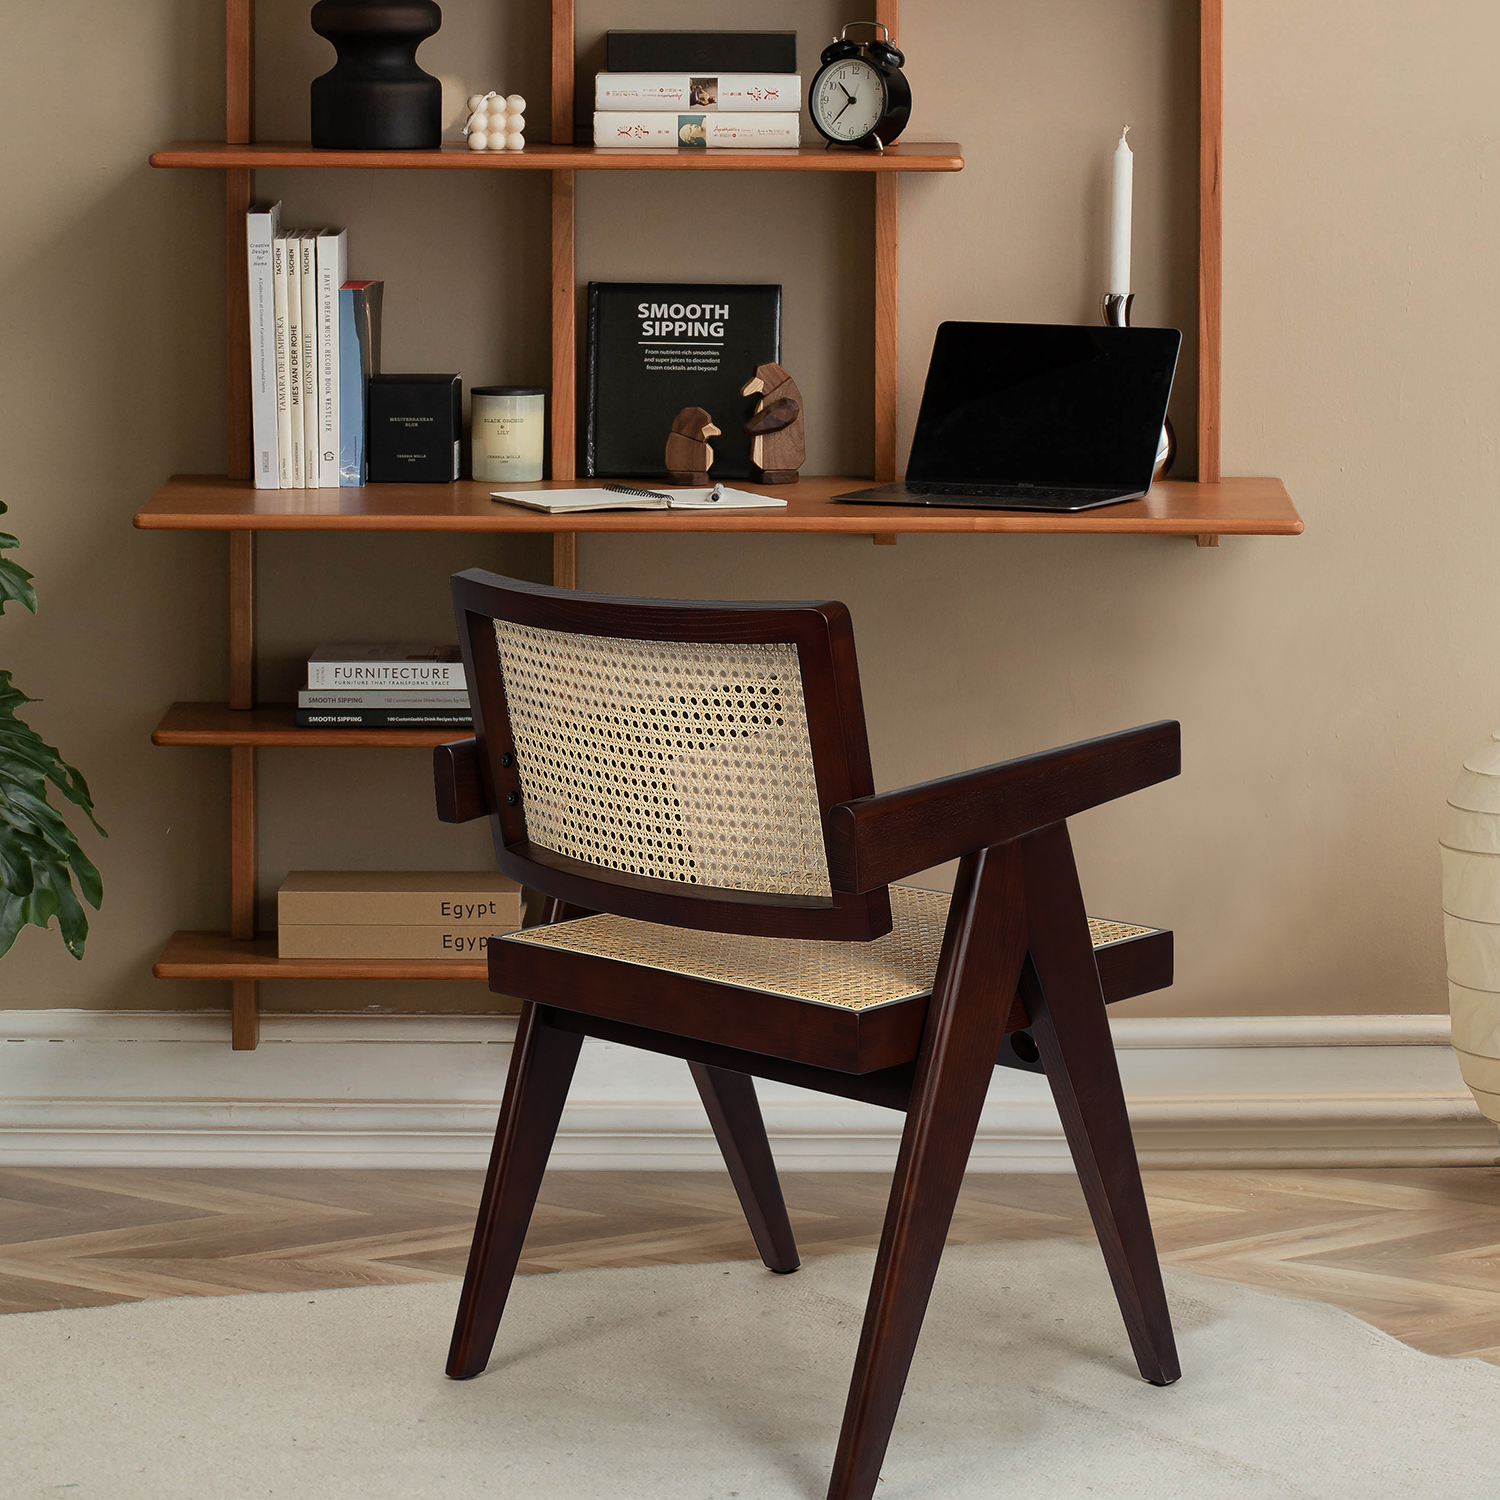 Luxuriance Designs - Chandigarh Rattan Dining Chair Replica by Pierre Jeanneret - Review